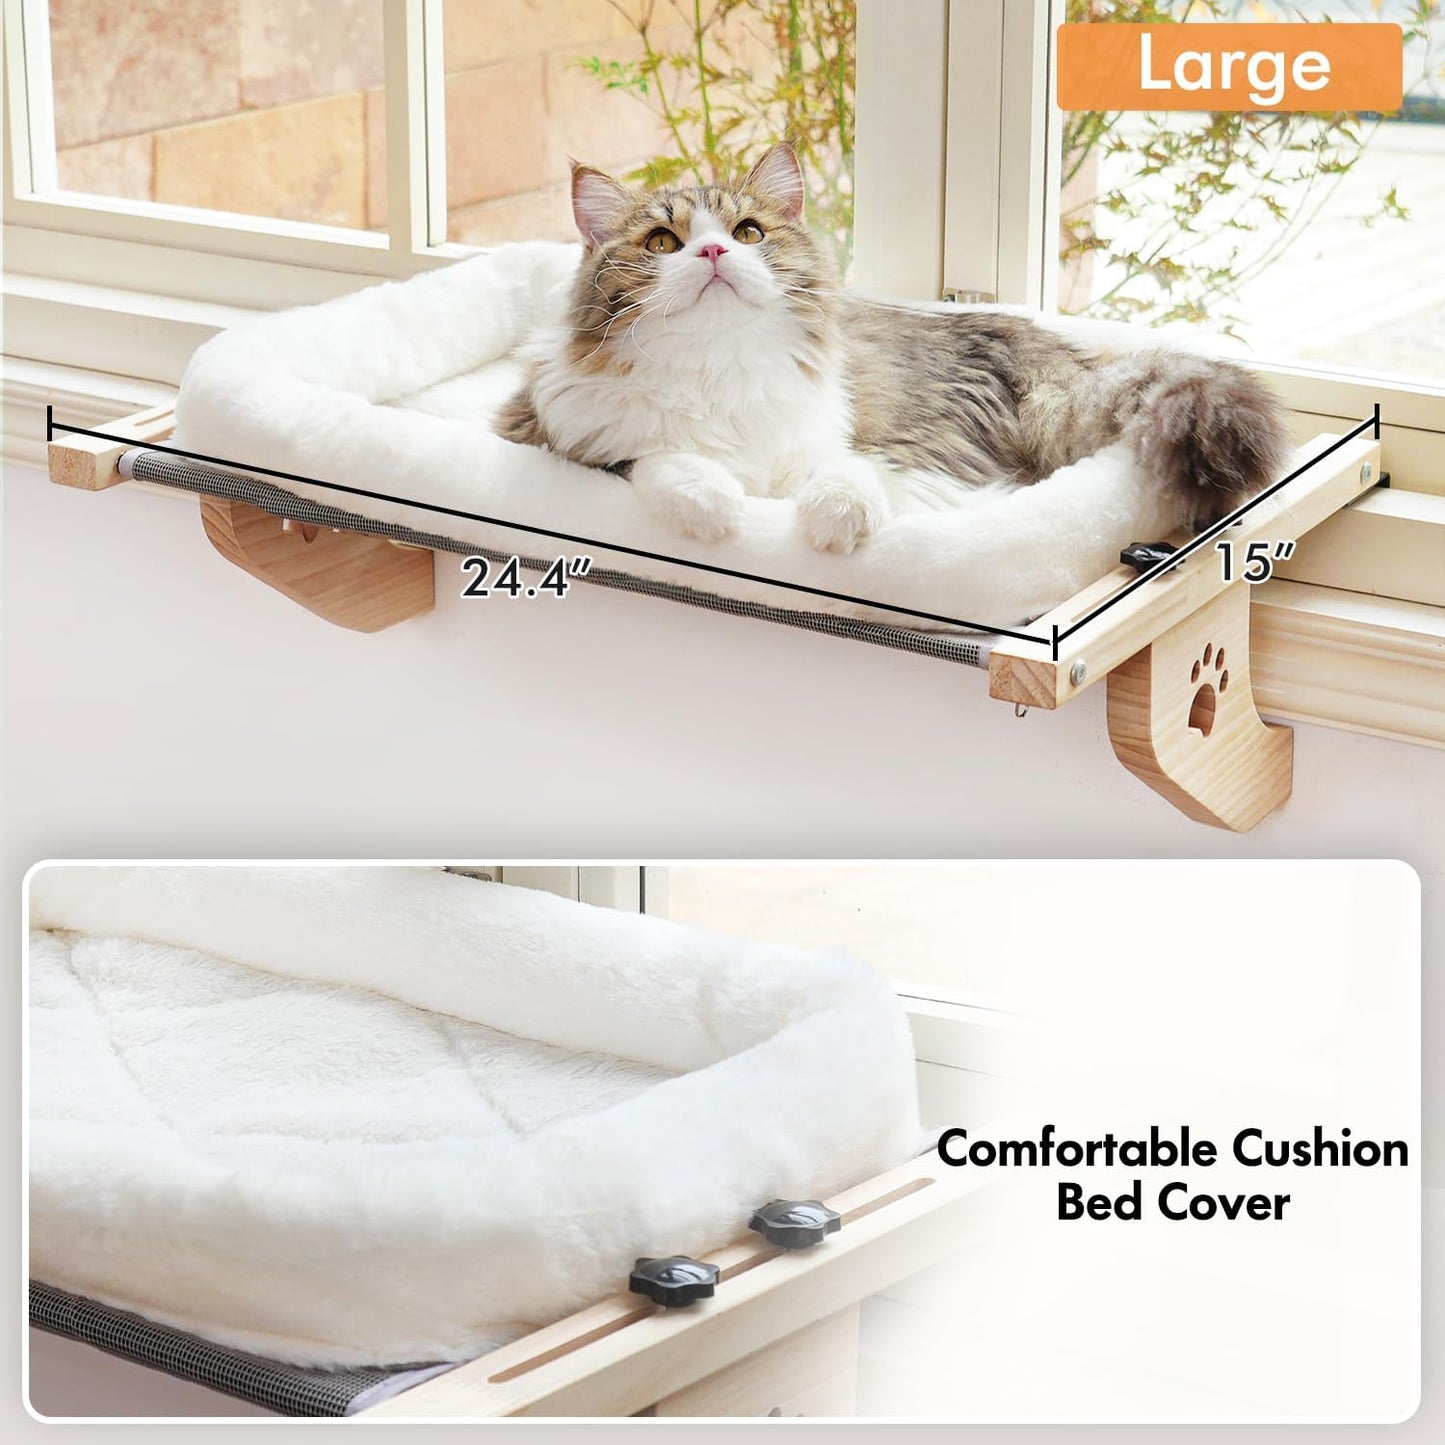 Cat Sill Window Perch Sturdy Cat Hammock Window Seat with Cushion Bed Cover, Wood & Metal Frame for Large Cats, Easy to Adjust Cat Bed for Windowsill, Bedside, Drawer and Cabinet(Cushion Bed)